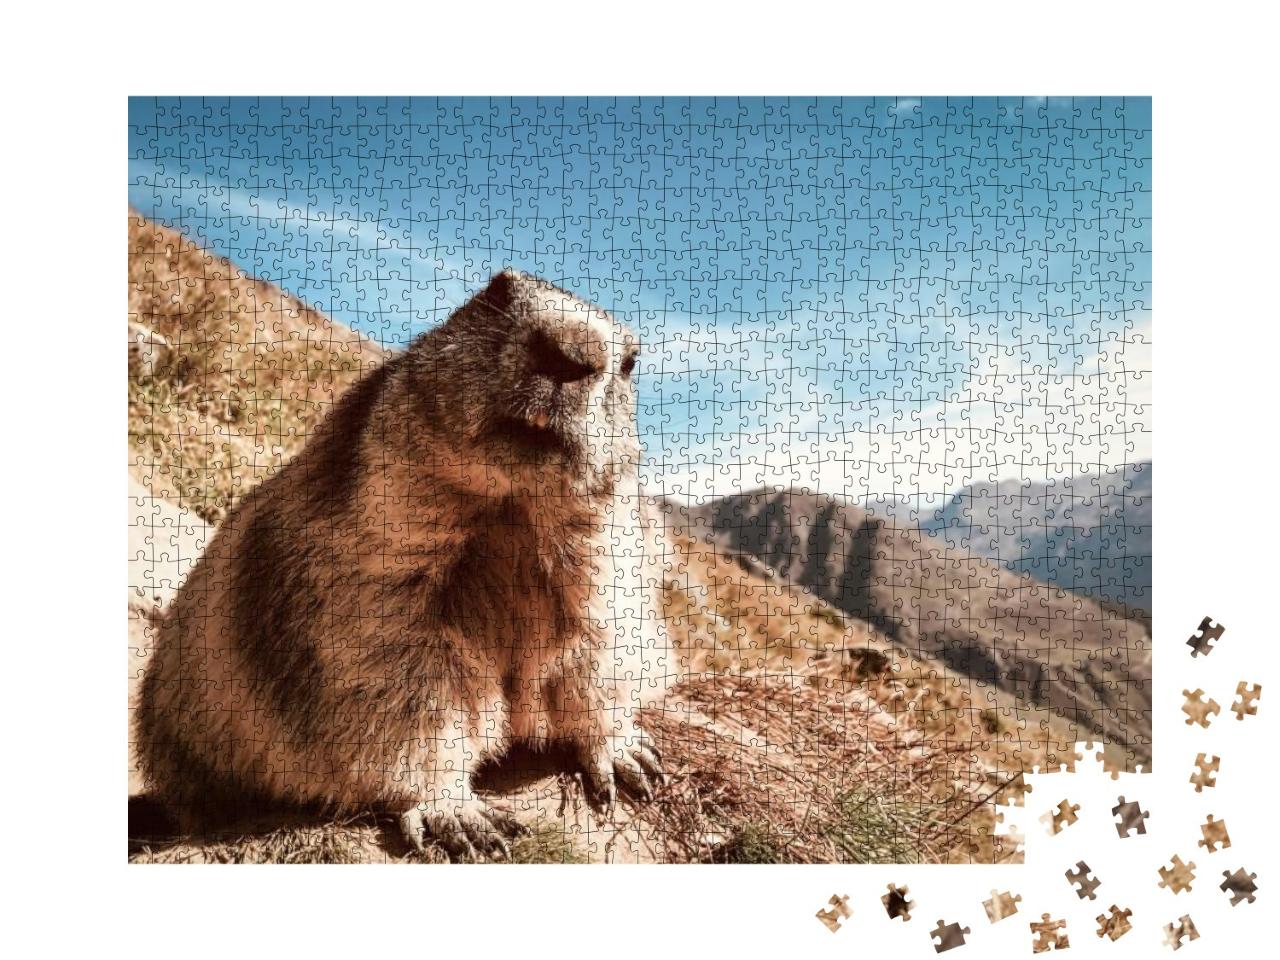 Marmot with Questioning Look... Jigsaw Puzzle with 1000 pieces